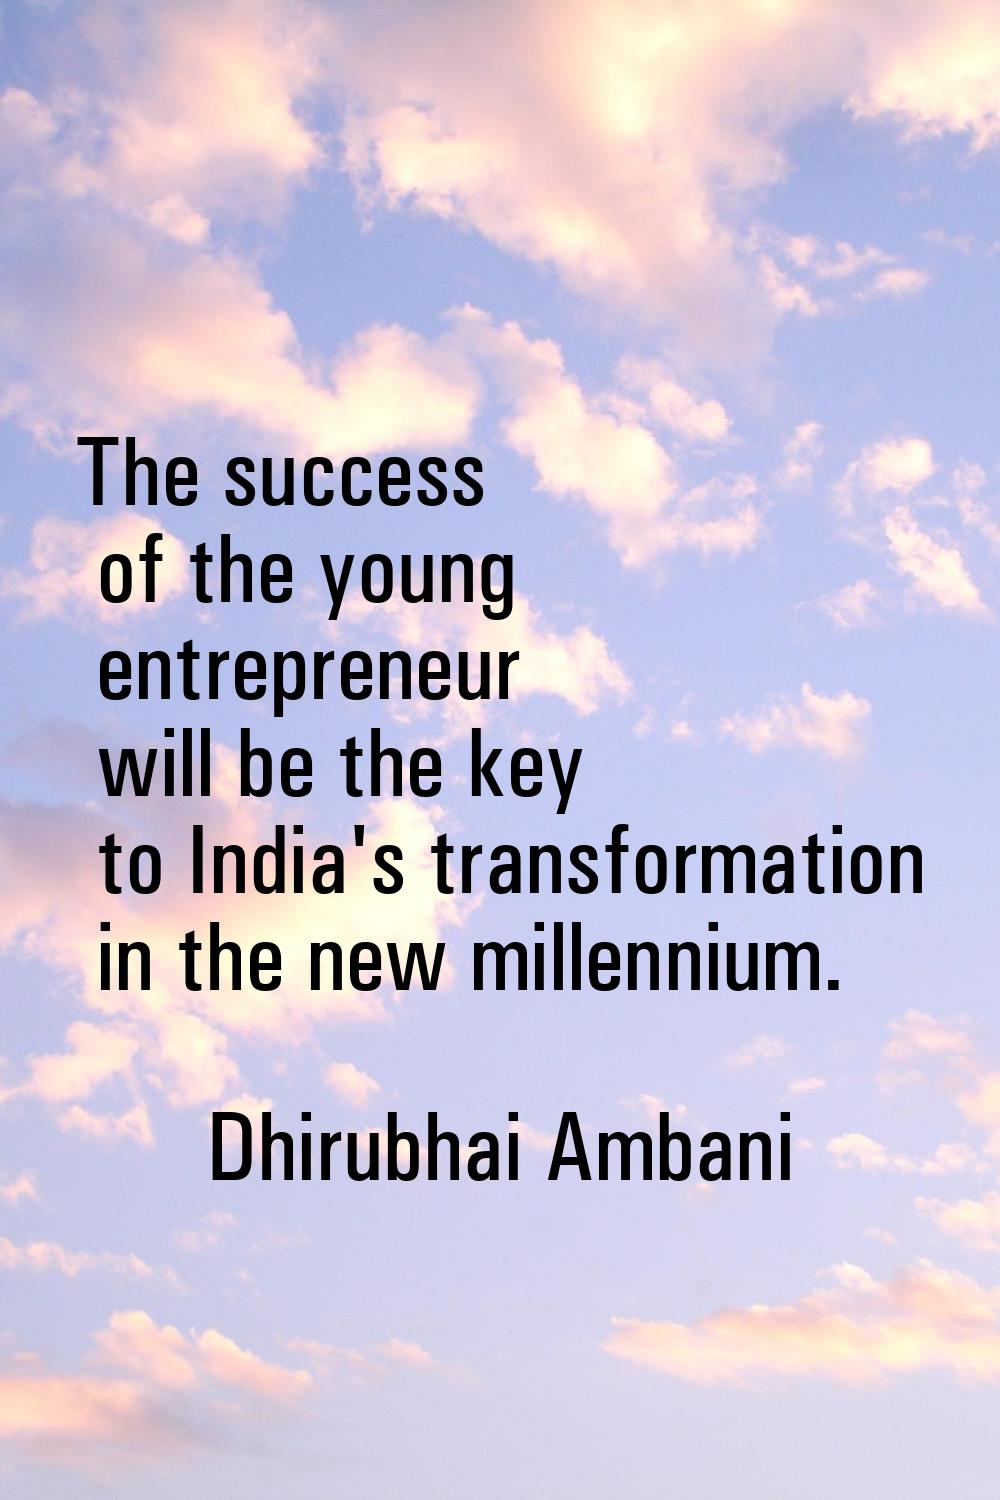 The success of the young entrepreneur will be the key to India's transformation in the new millenni